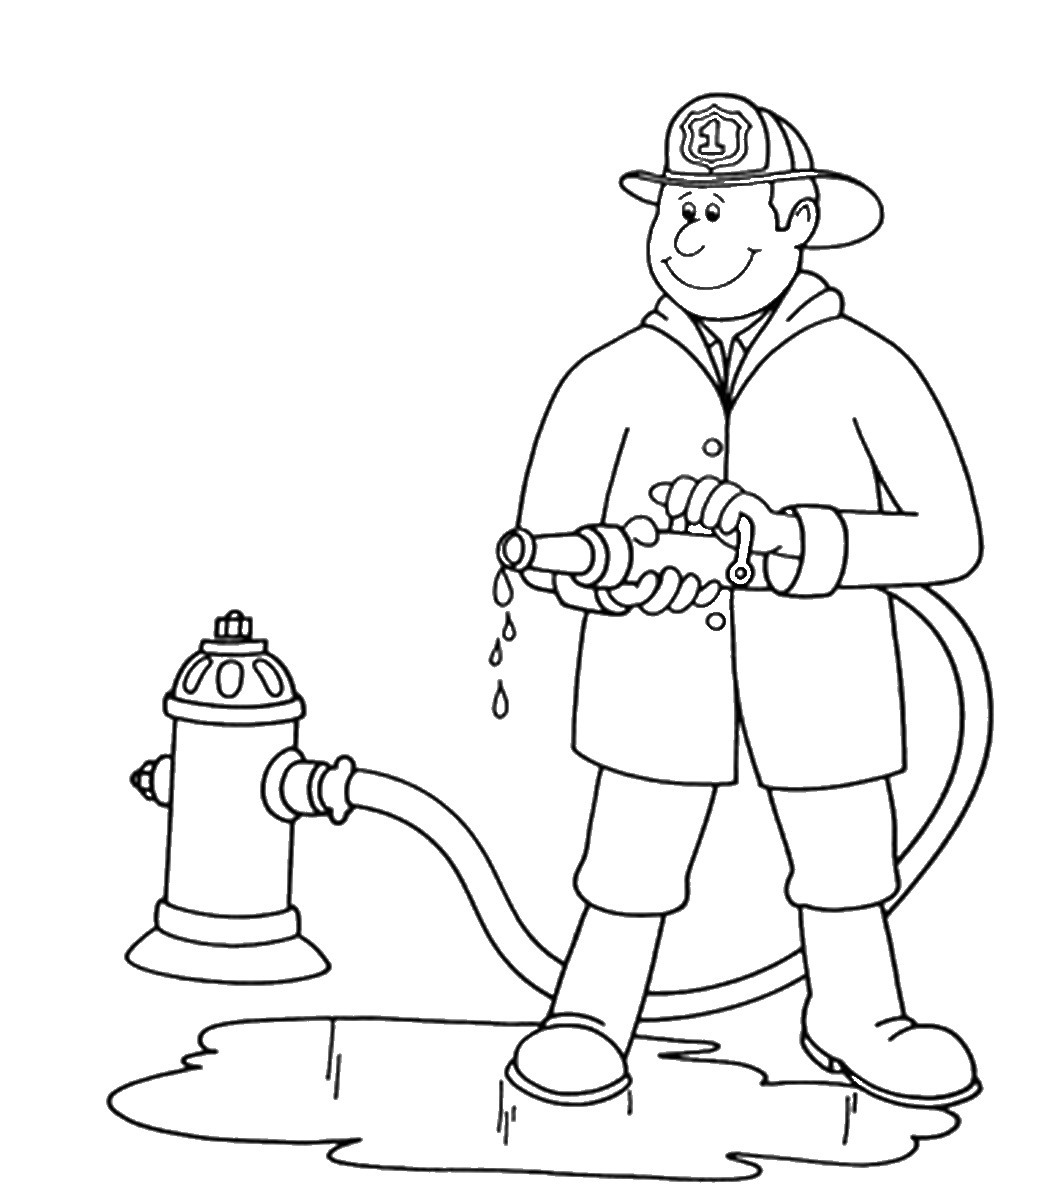 fire safety clip art black and white